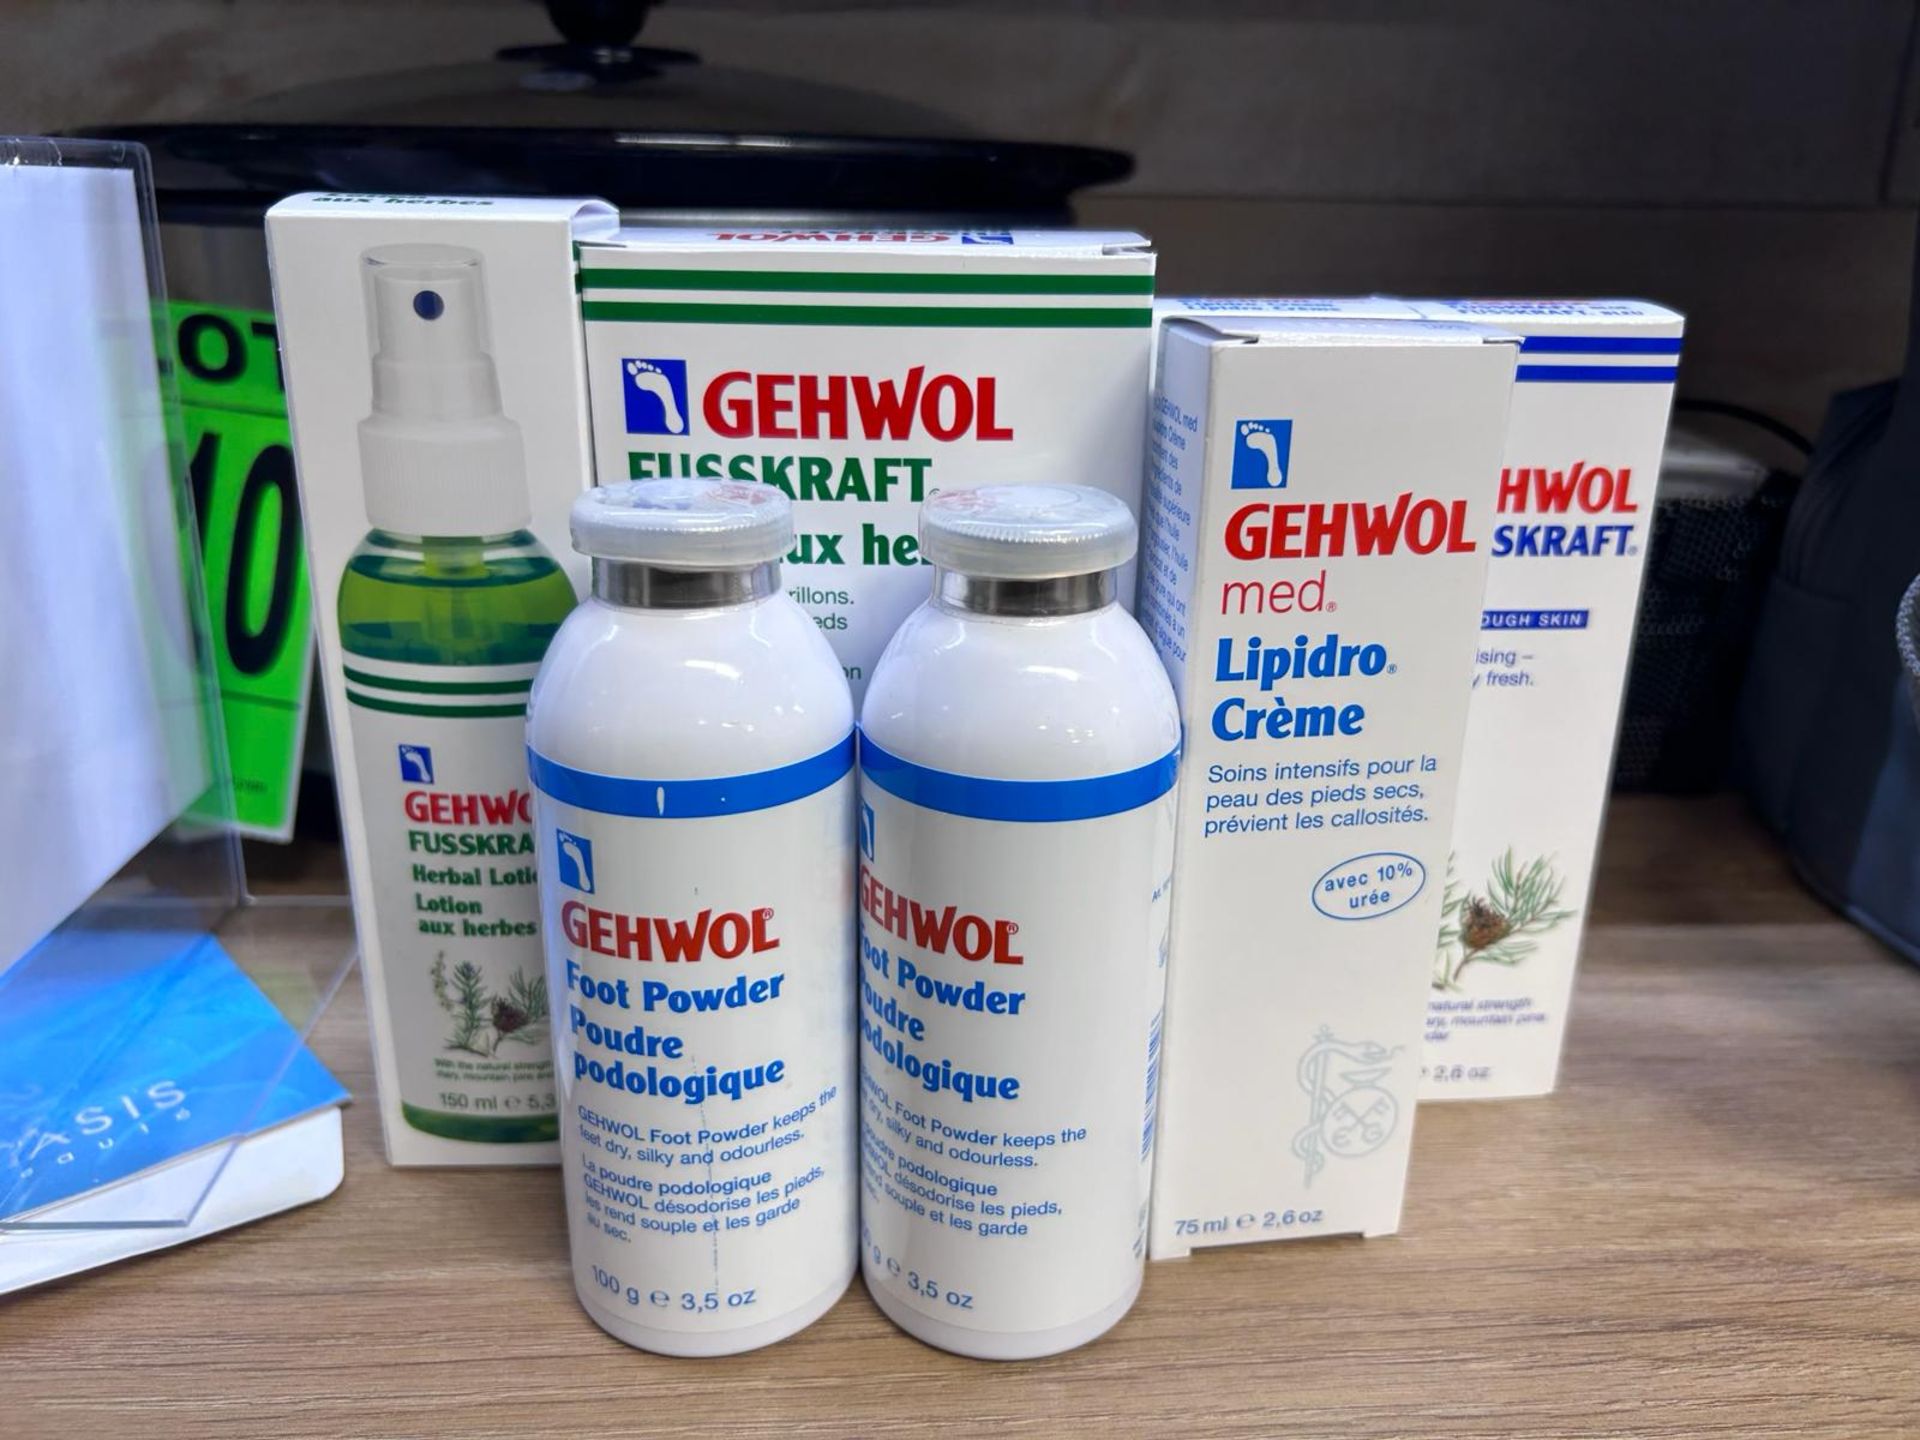 Lot of assorted GEHWOL products incl. Foot powder, Lipidro creme, Herbal lotion